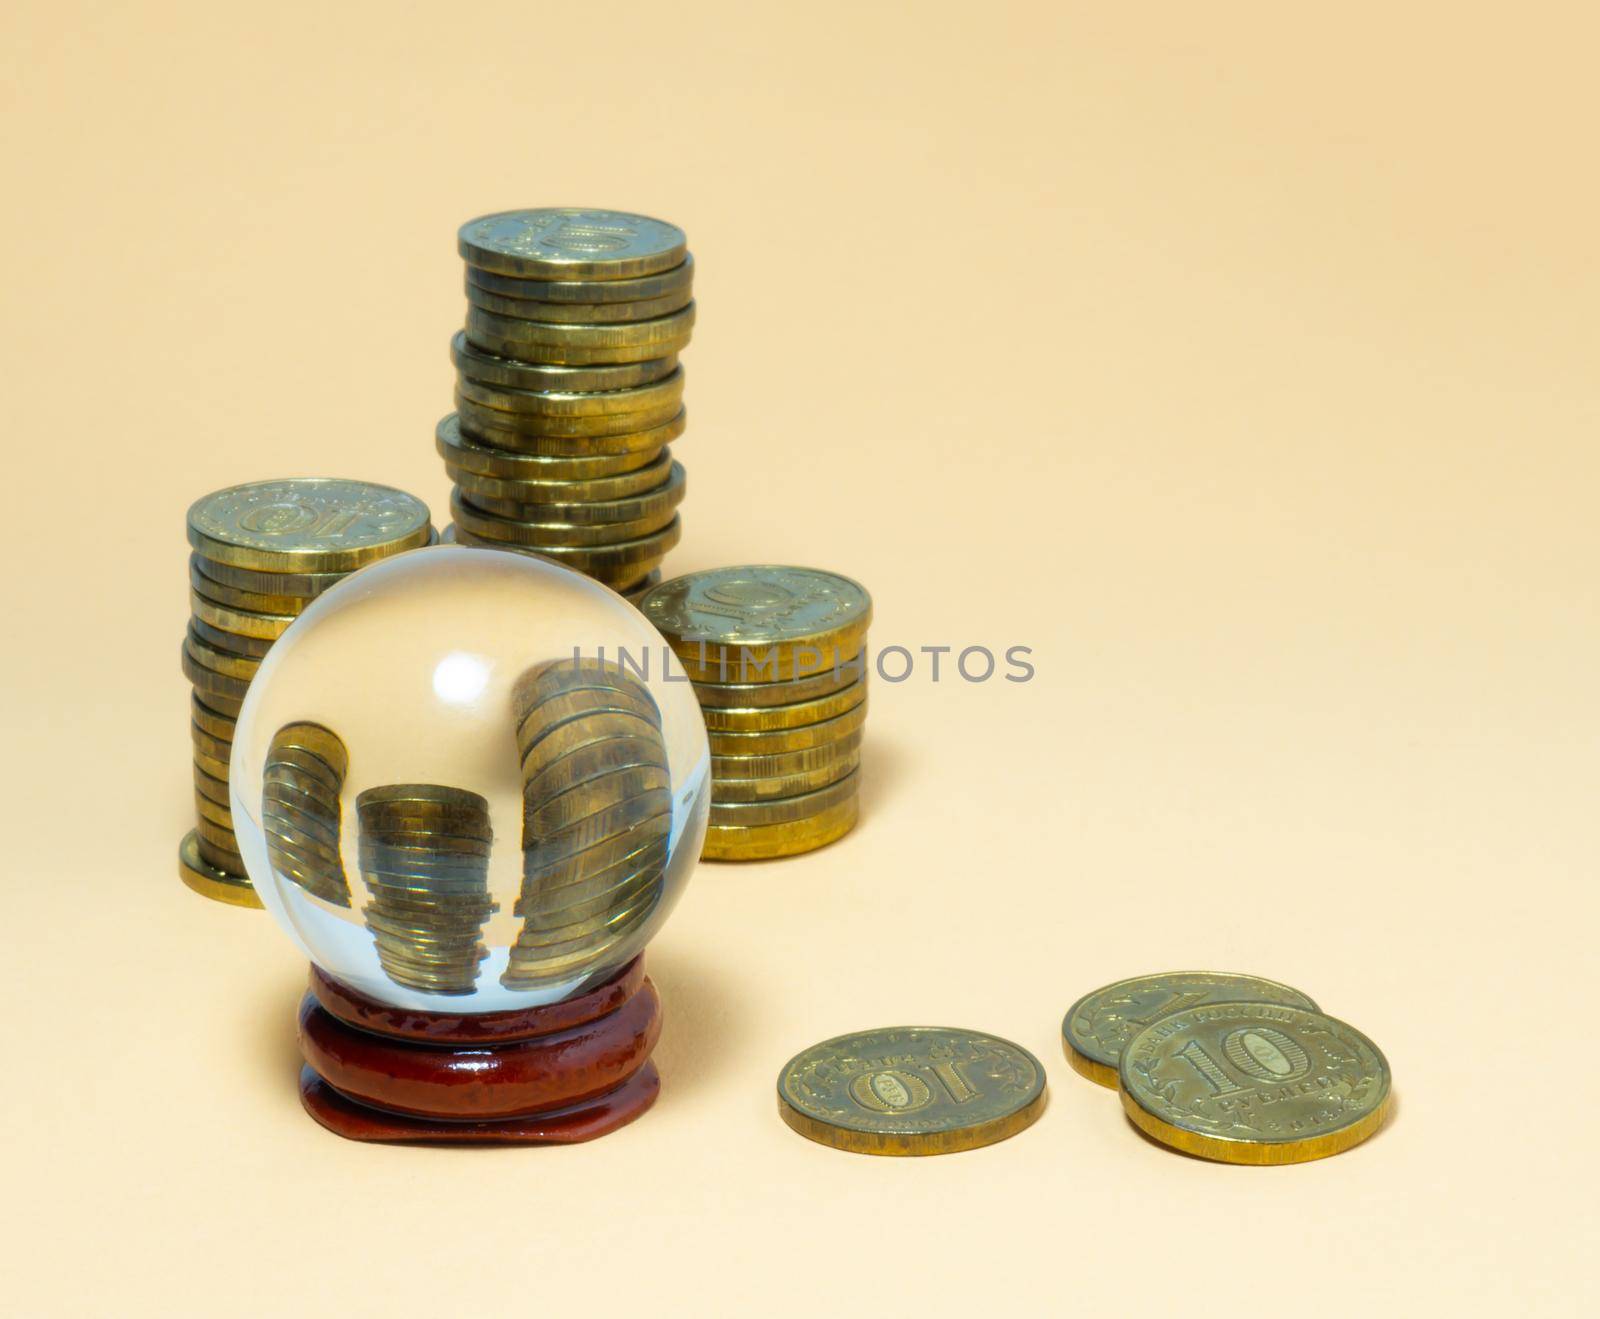 Pyramids of coins are reflected in a glass ball.
